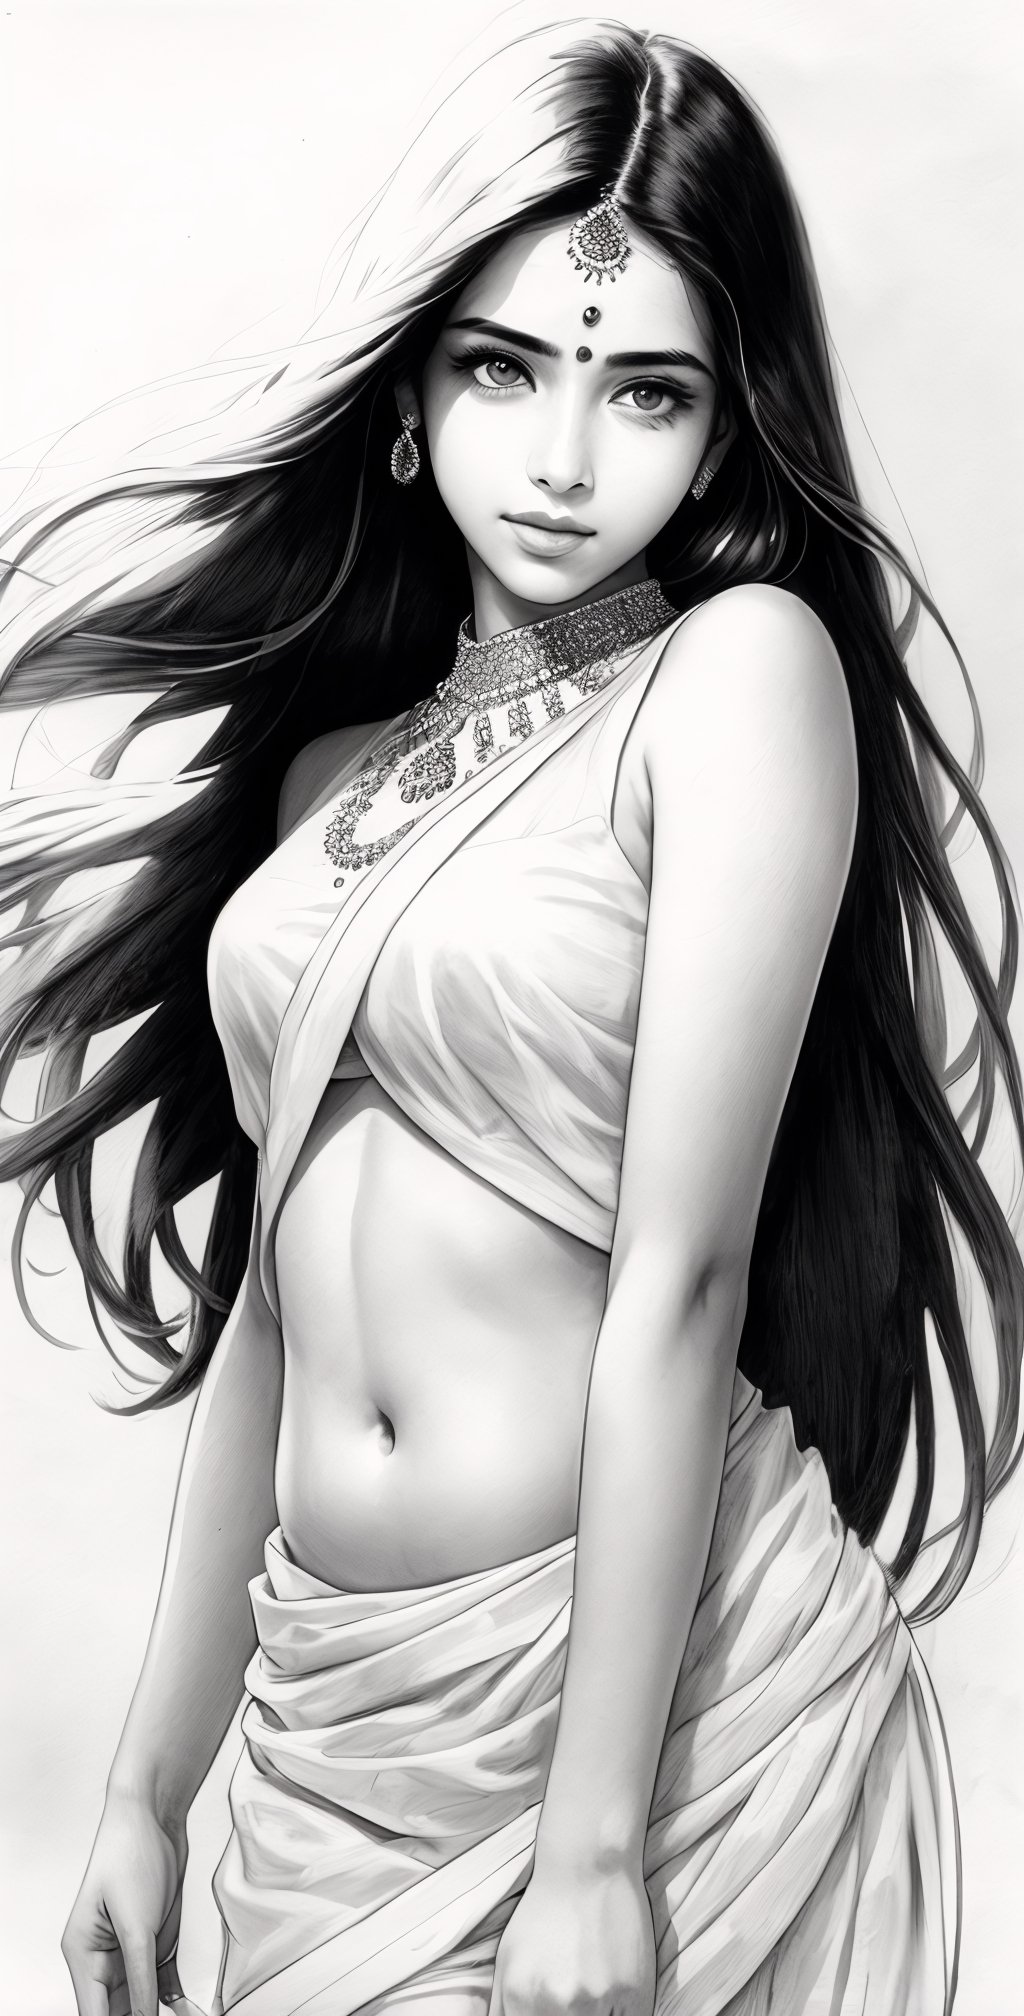 Pencil sketch, pencil sketch portrait of beautiful indian girl with long hair, blue eyes, embarrassed,  nice figure, slim belly, Indian dress, Art, black and white, on white art paper, realistic sketch, ultra real sketch, pencil stroke sketch, pencil stroke shadow, perfect real light on paper, xyzsanart01,iinksketch,line anime,monochrome